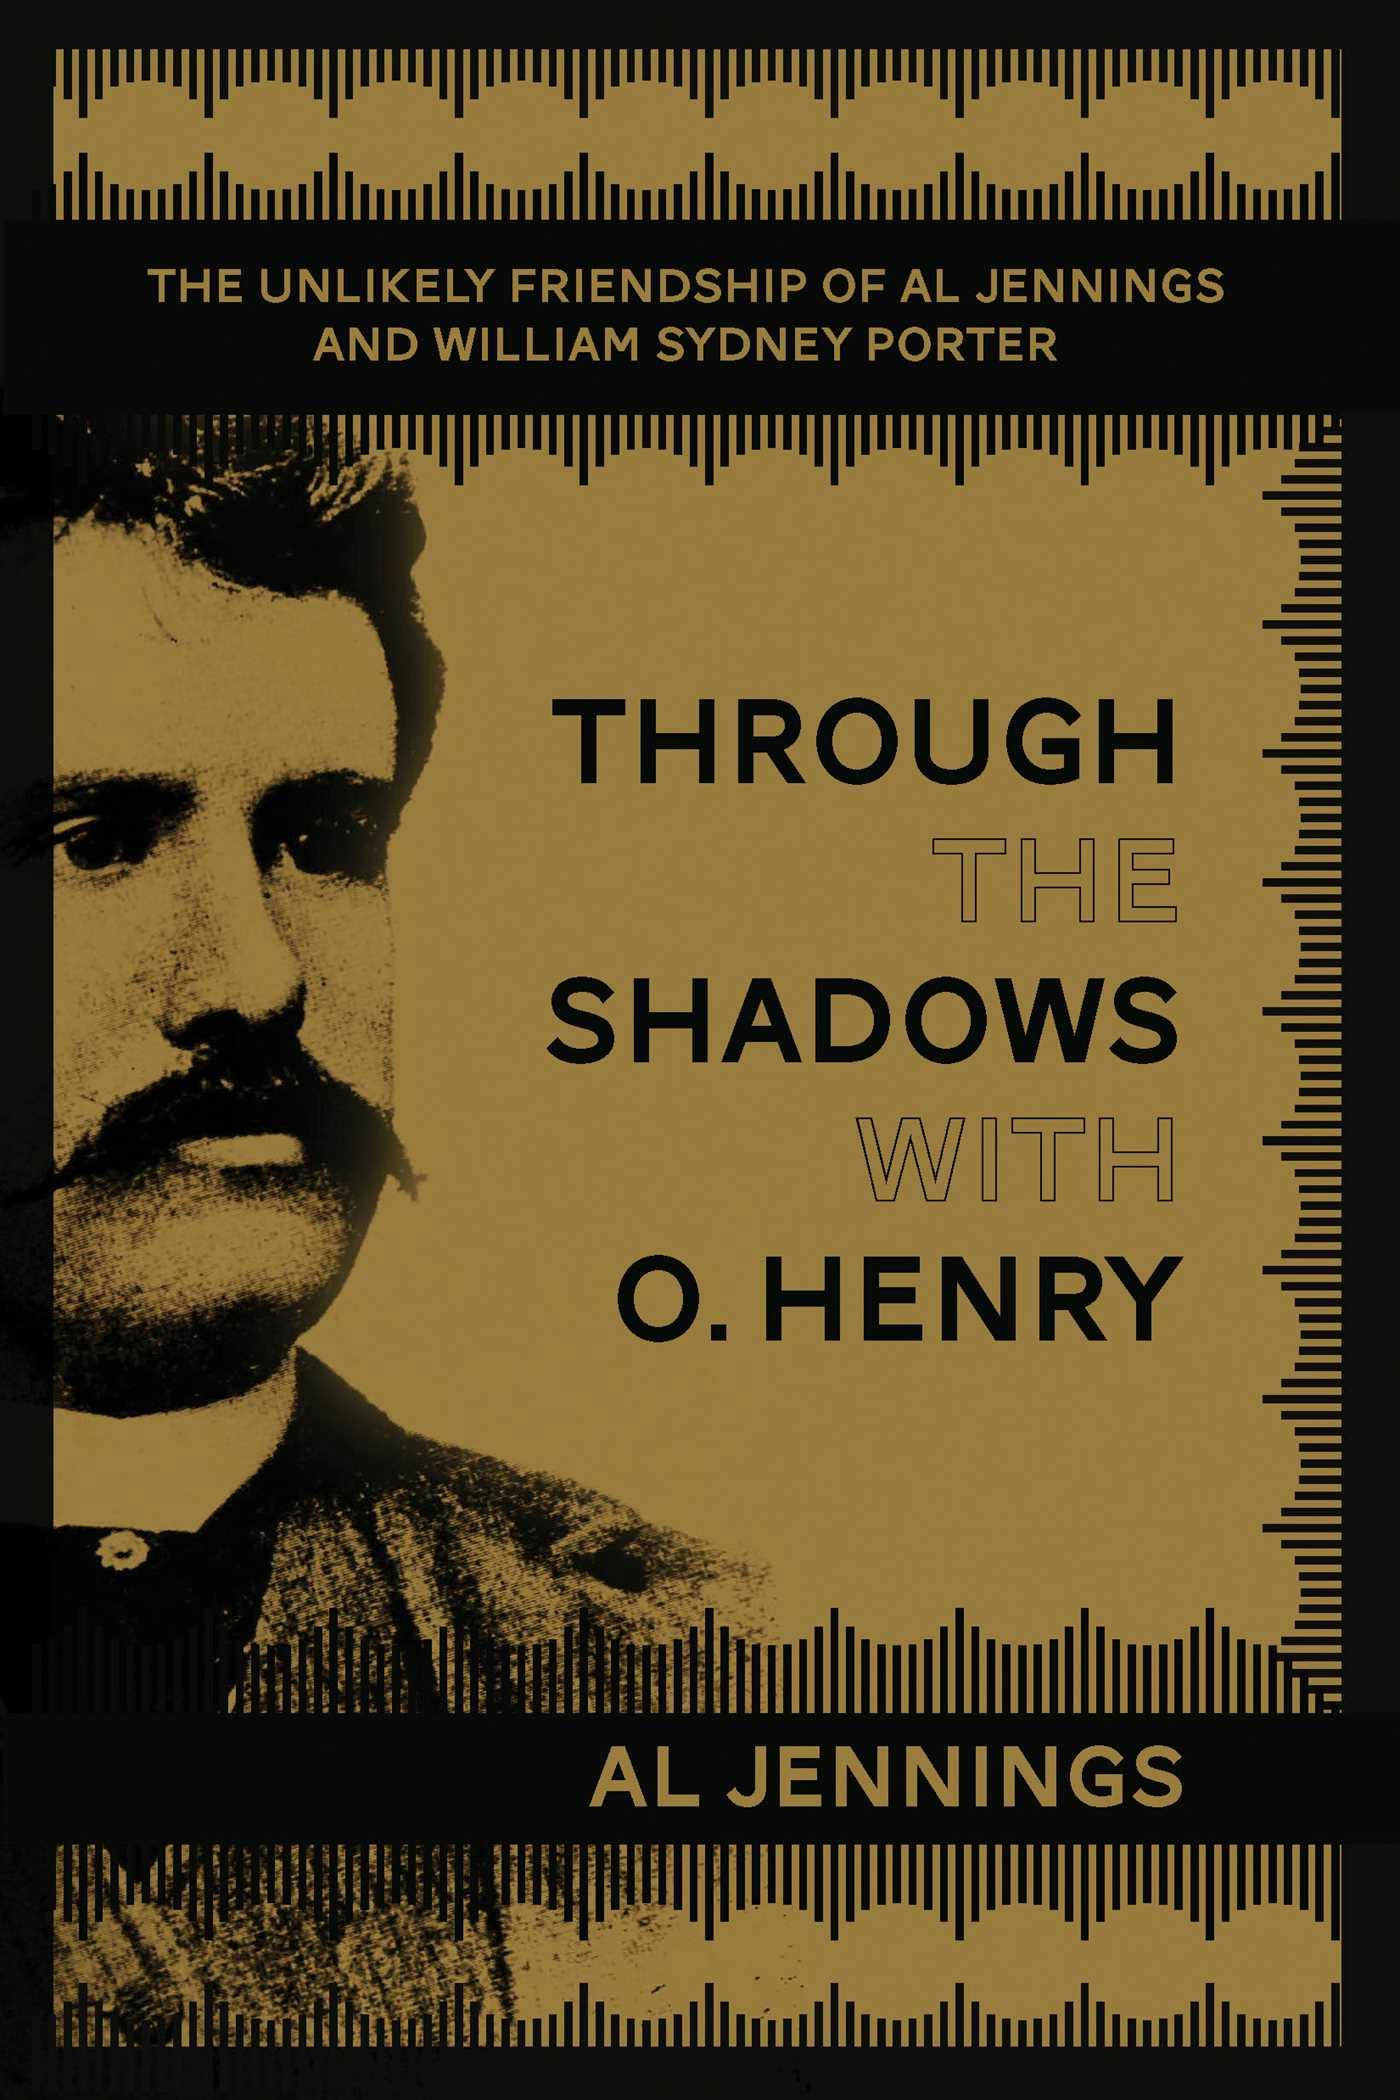 Through the Shadows with O. Henry: The Unlikely Friendship of Al Jennings and William Sydney Porter - Al Jennings